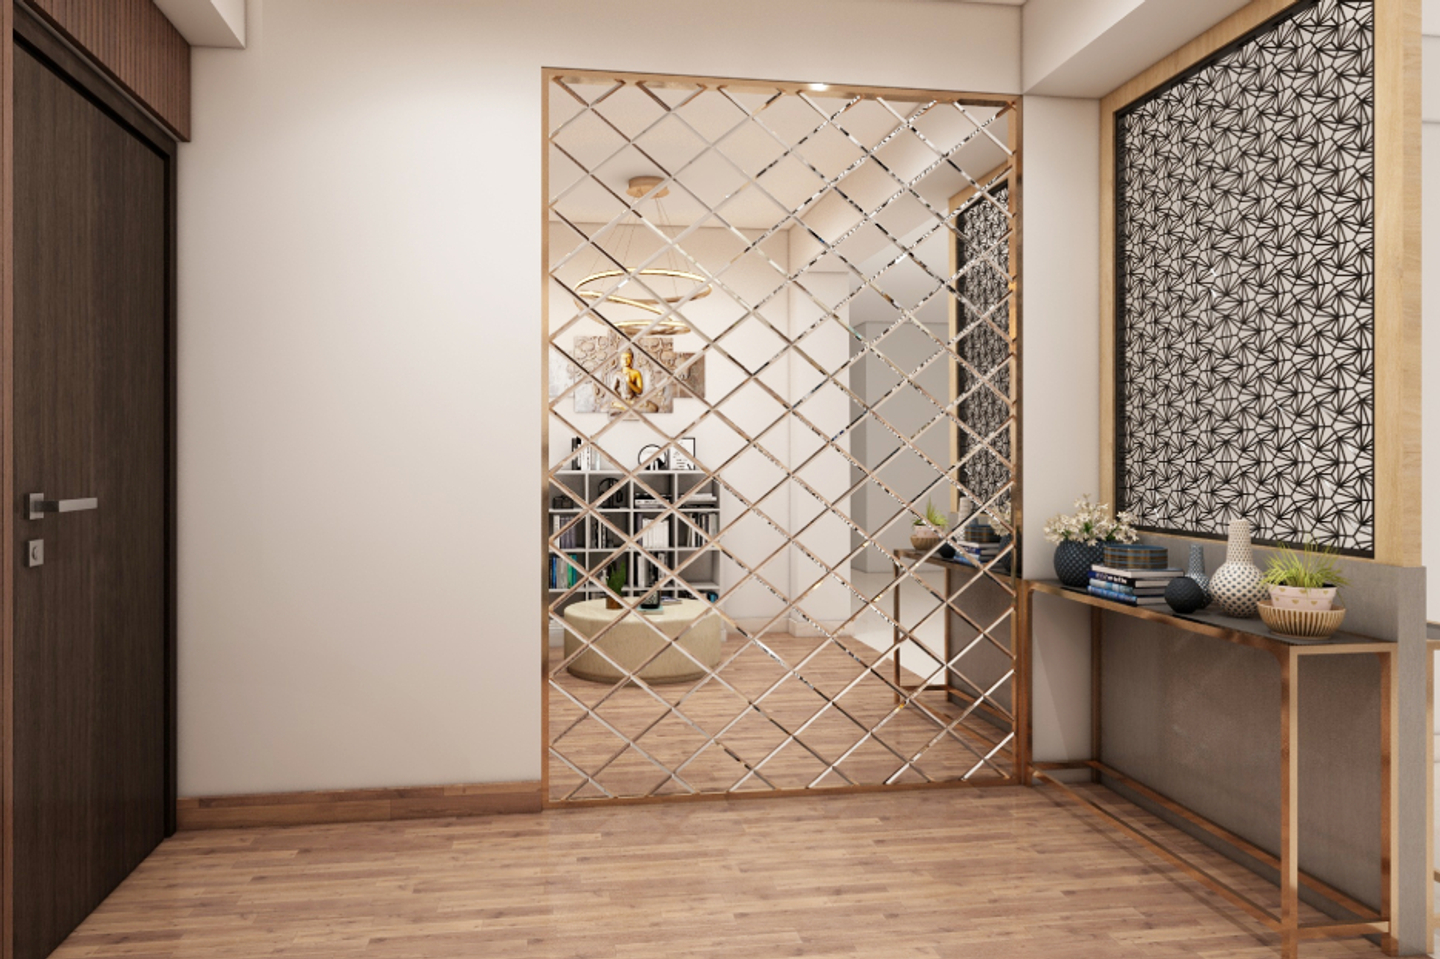 Contemporary Foyer Design With A Metallic Gold Storage Unit